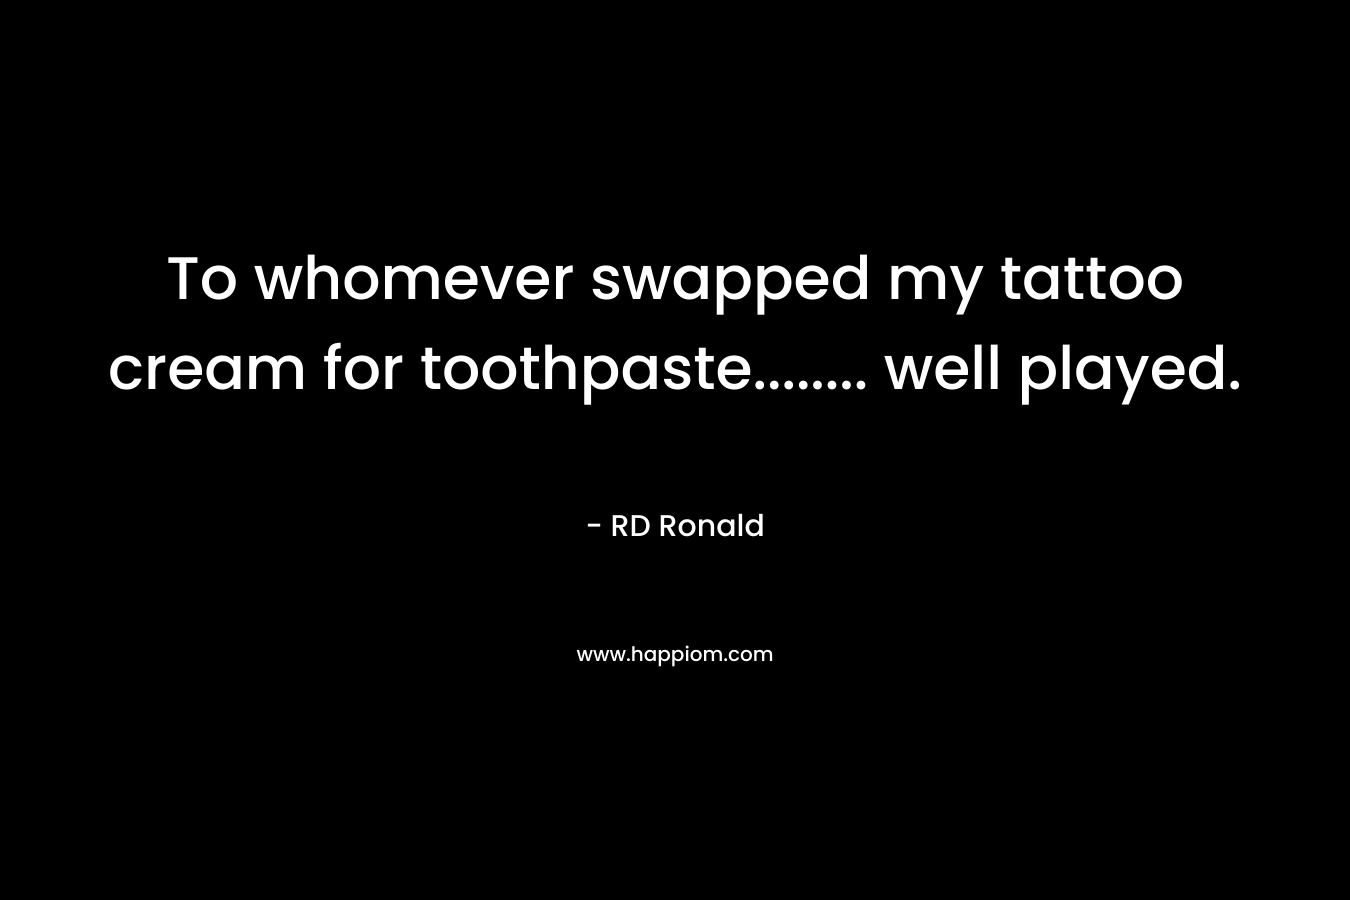 To whomever swapped my tattoo cream for toothpaste…….. well played. – RD Ronald